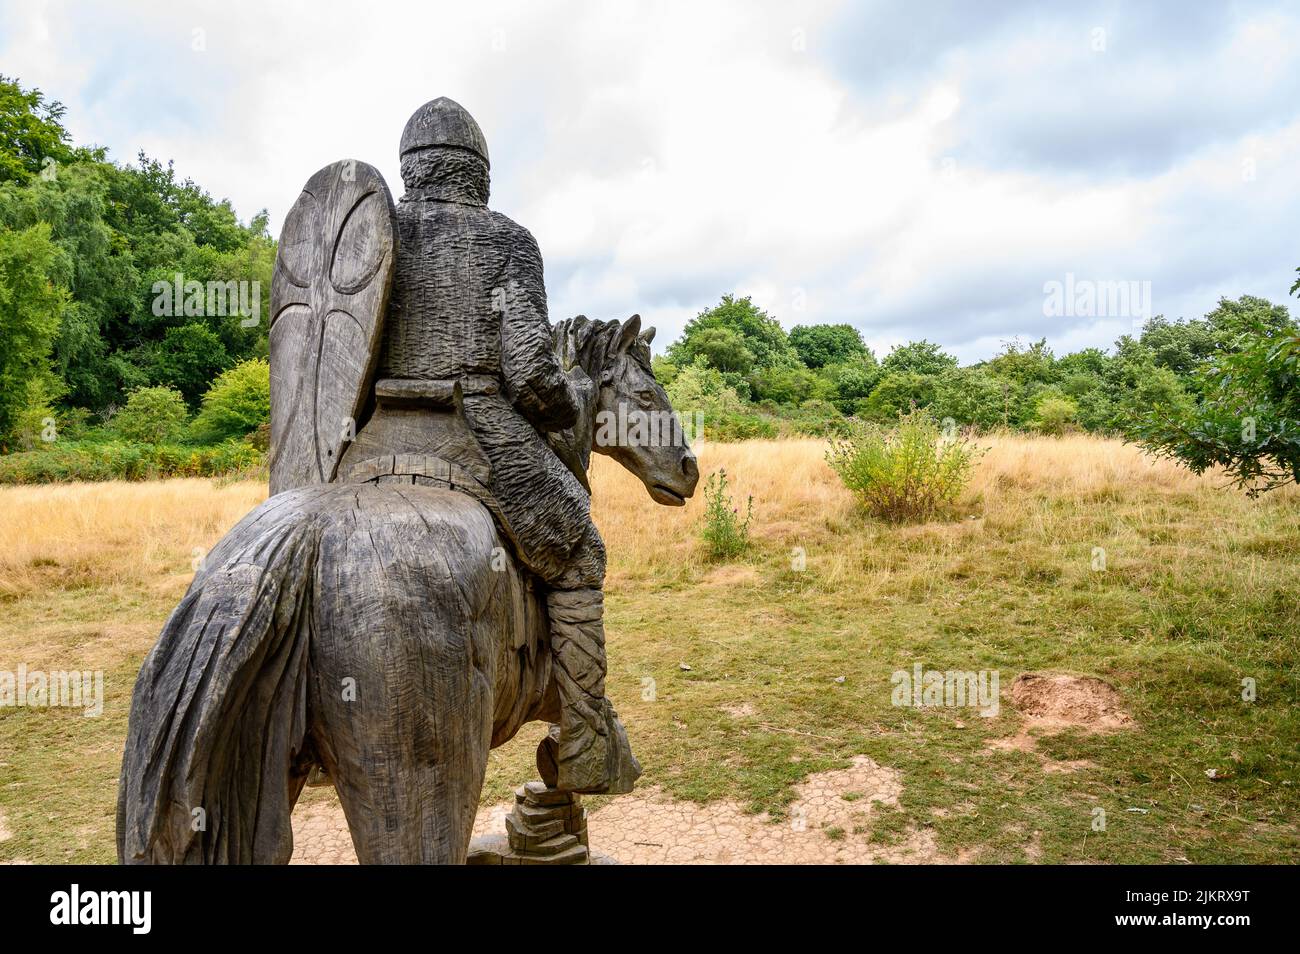 View over the battlefield at the Battle of Hastings in 1066 with a wood sculpture of a Norman warrior, Battle, East Sussex, England. Stock Photo